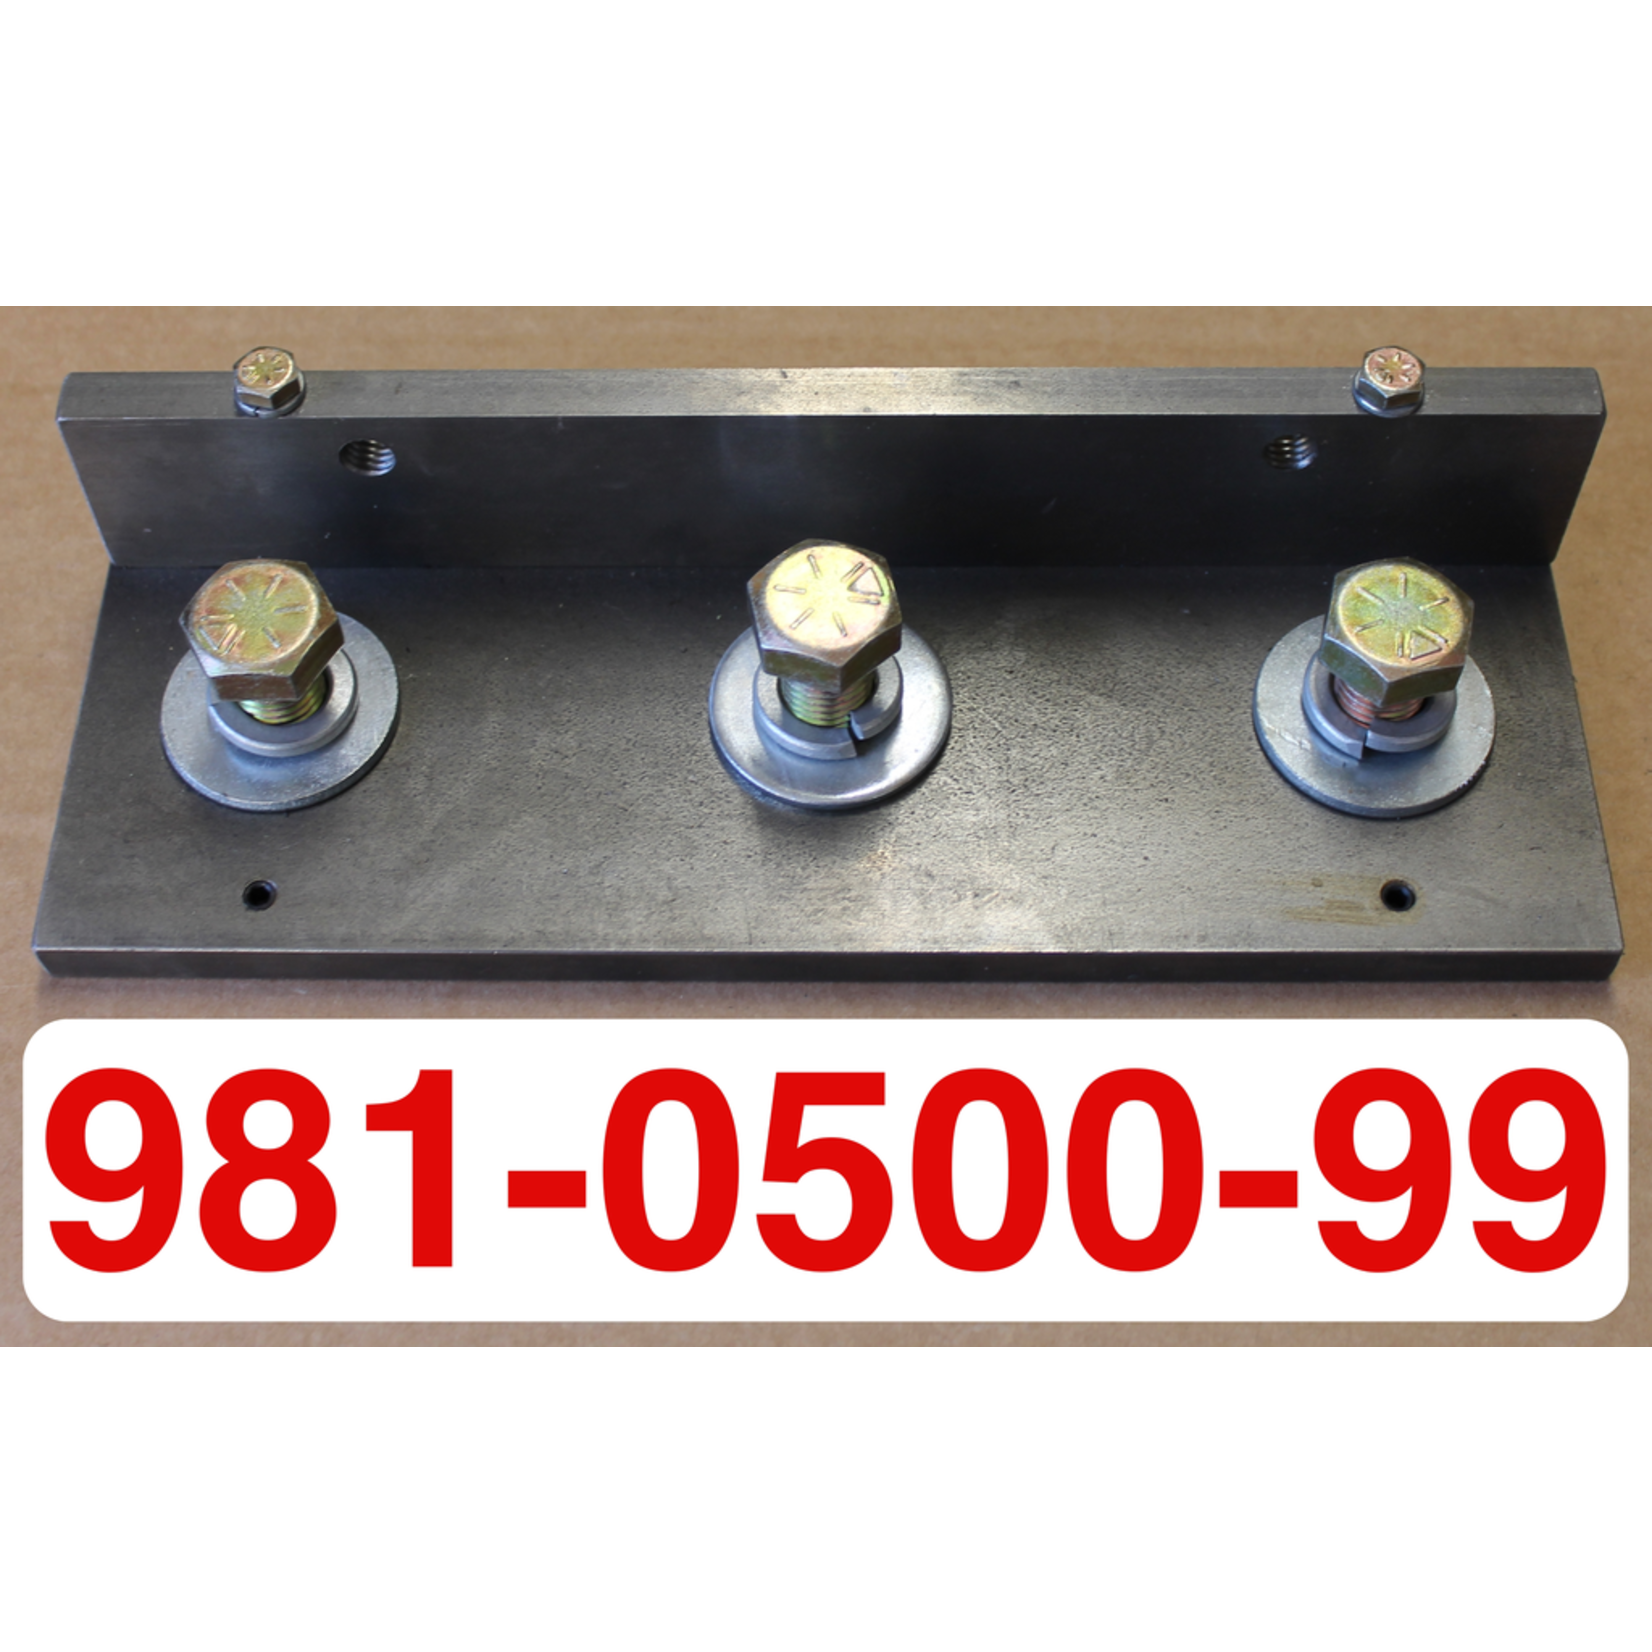 Anvil 4 Sided Model 250 with Bolt On Lip, 981-0500-99